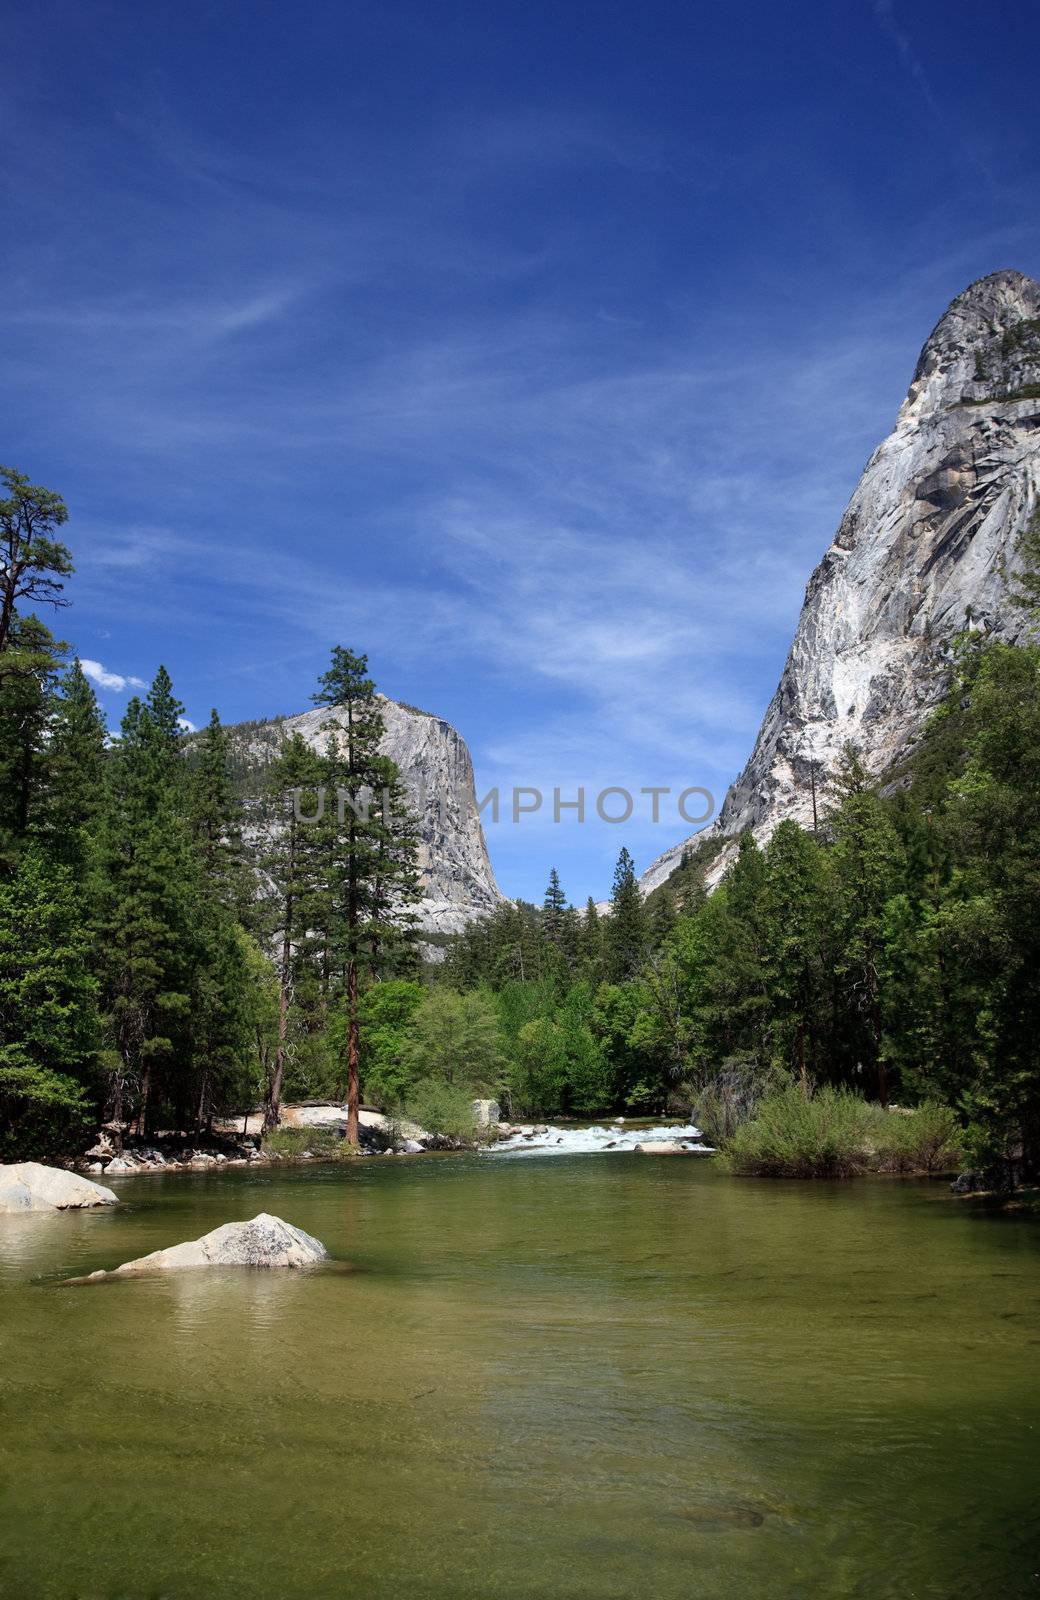 Yosemite valley peaks reflected in the calm water of Mirror lake